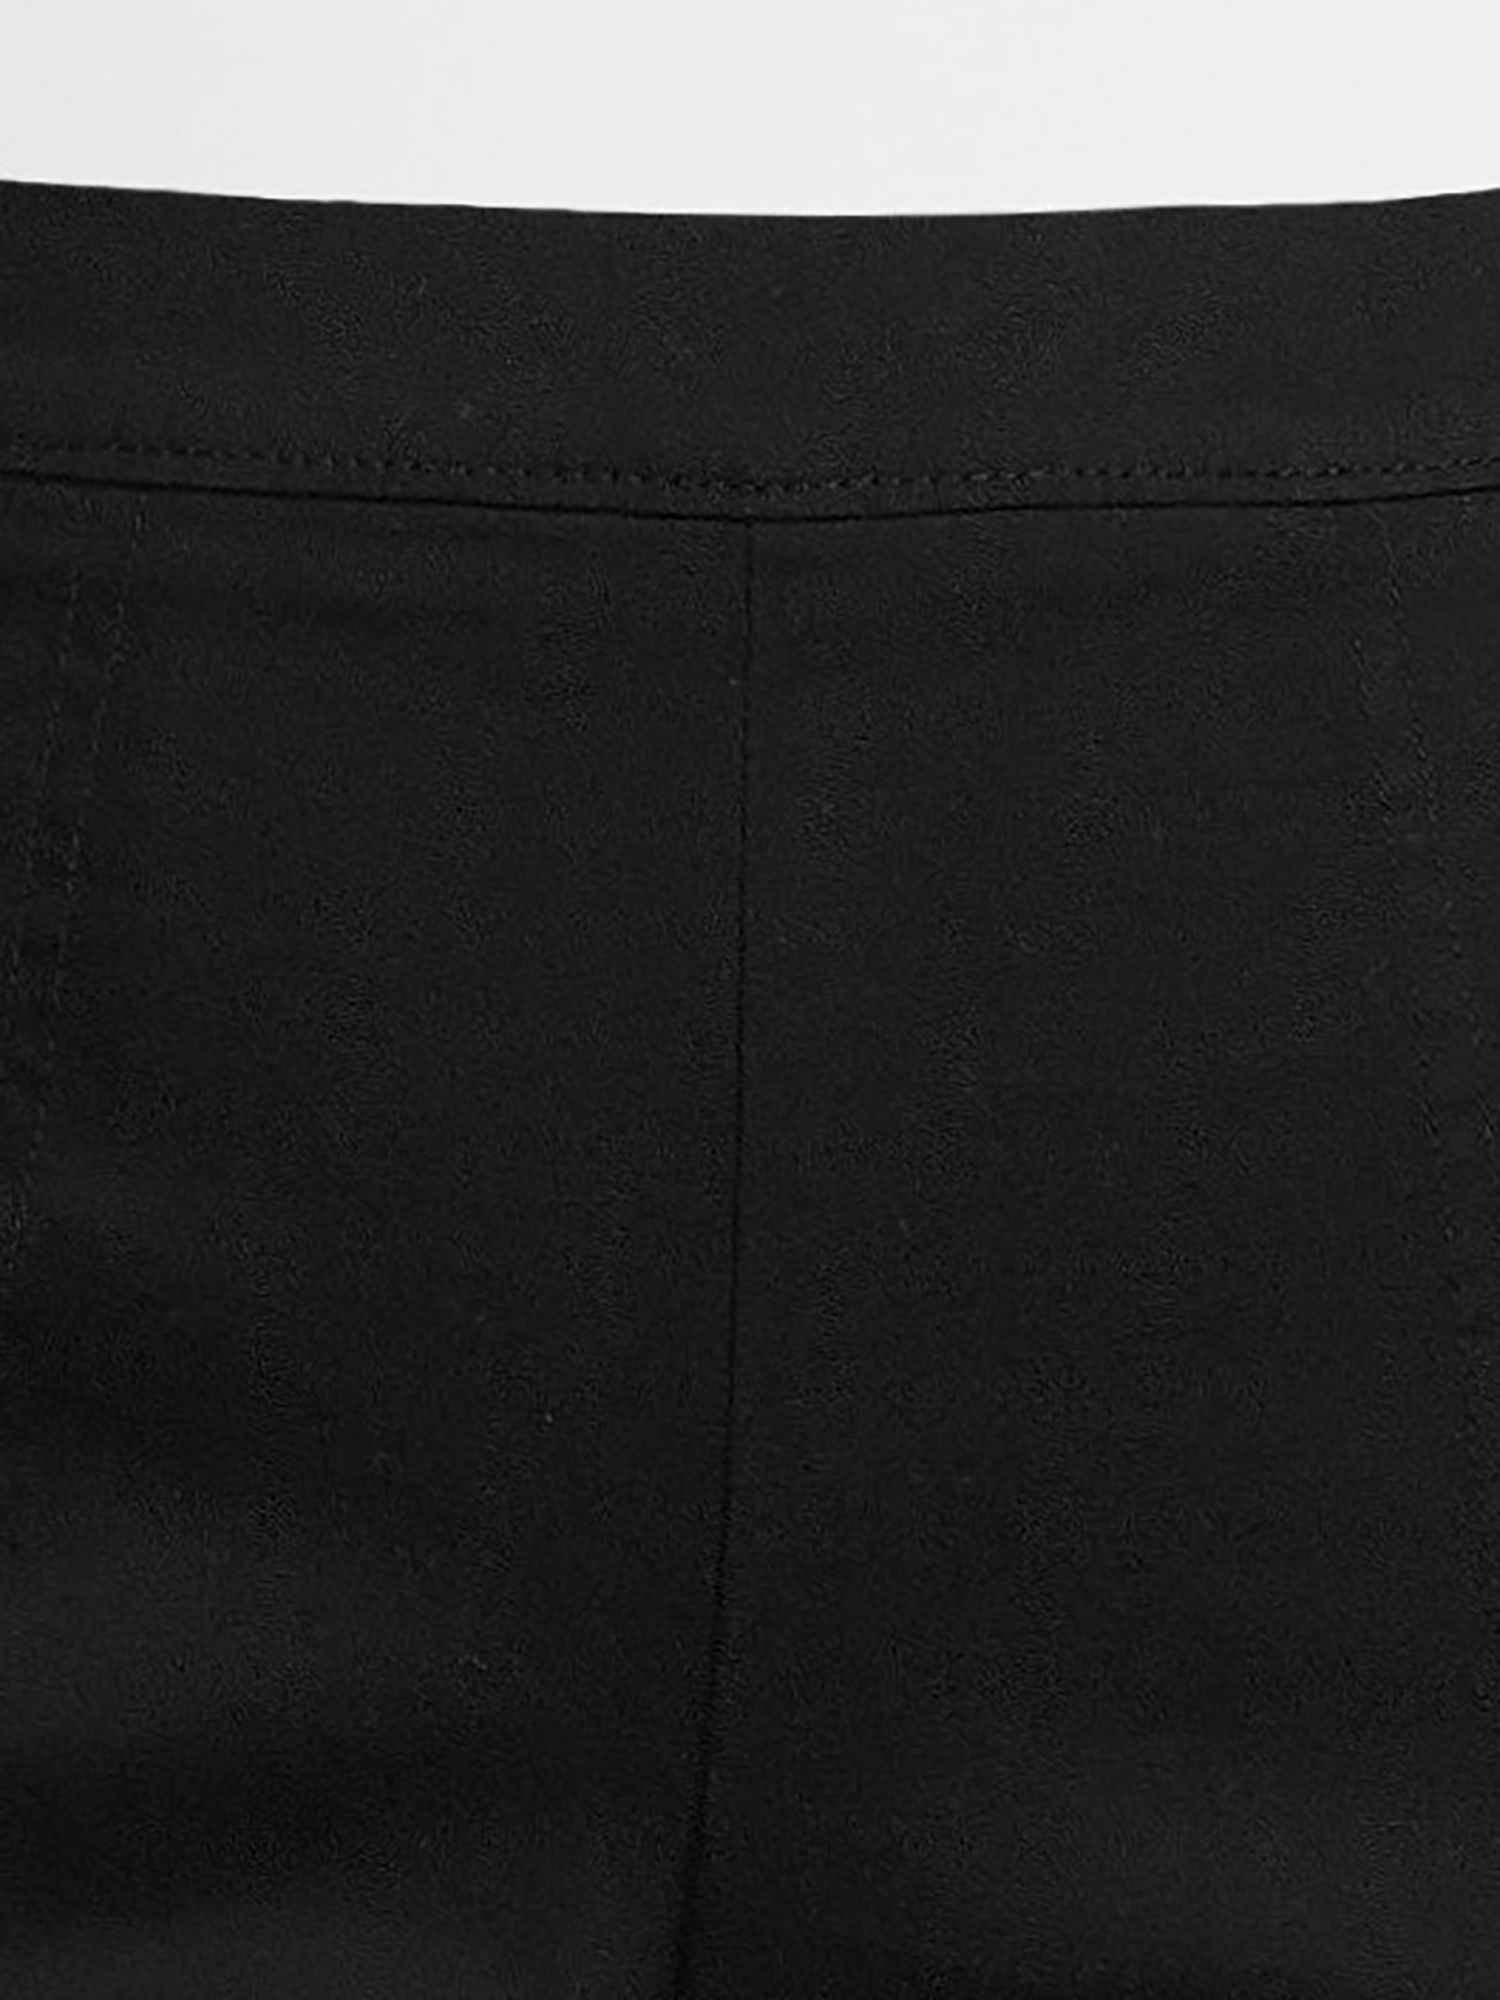 Just My Size Women's Plus 2 Pocket Pull-On Pant - image 4 of 8